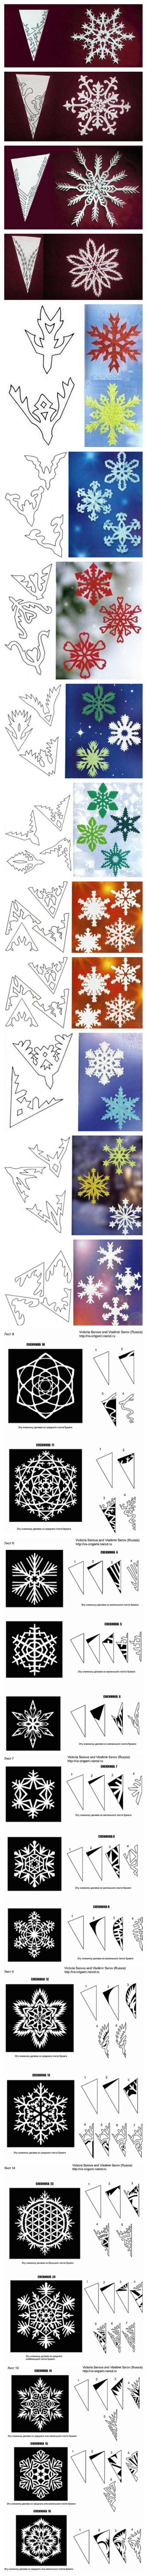 paper snowflakes – designs – this takes some of the fun out of it but I may do a